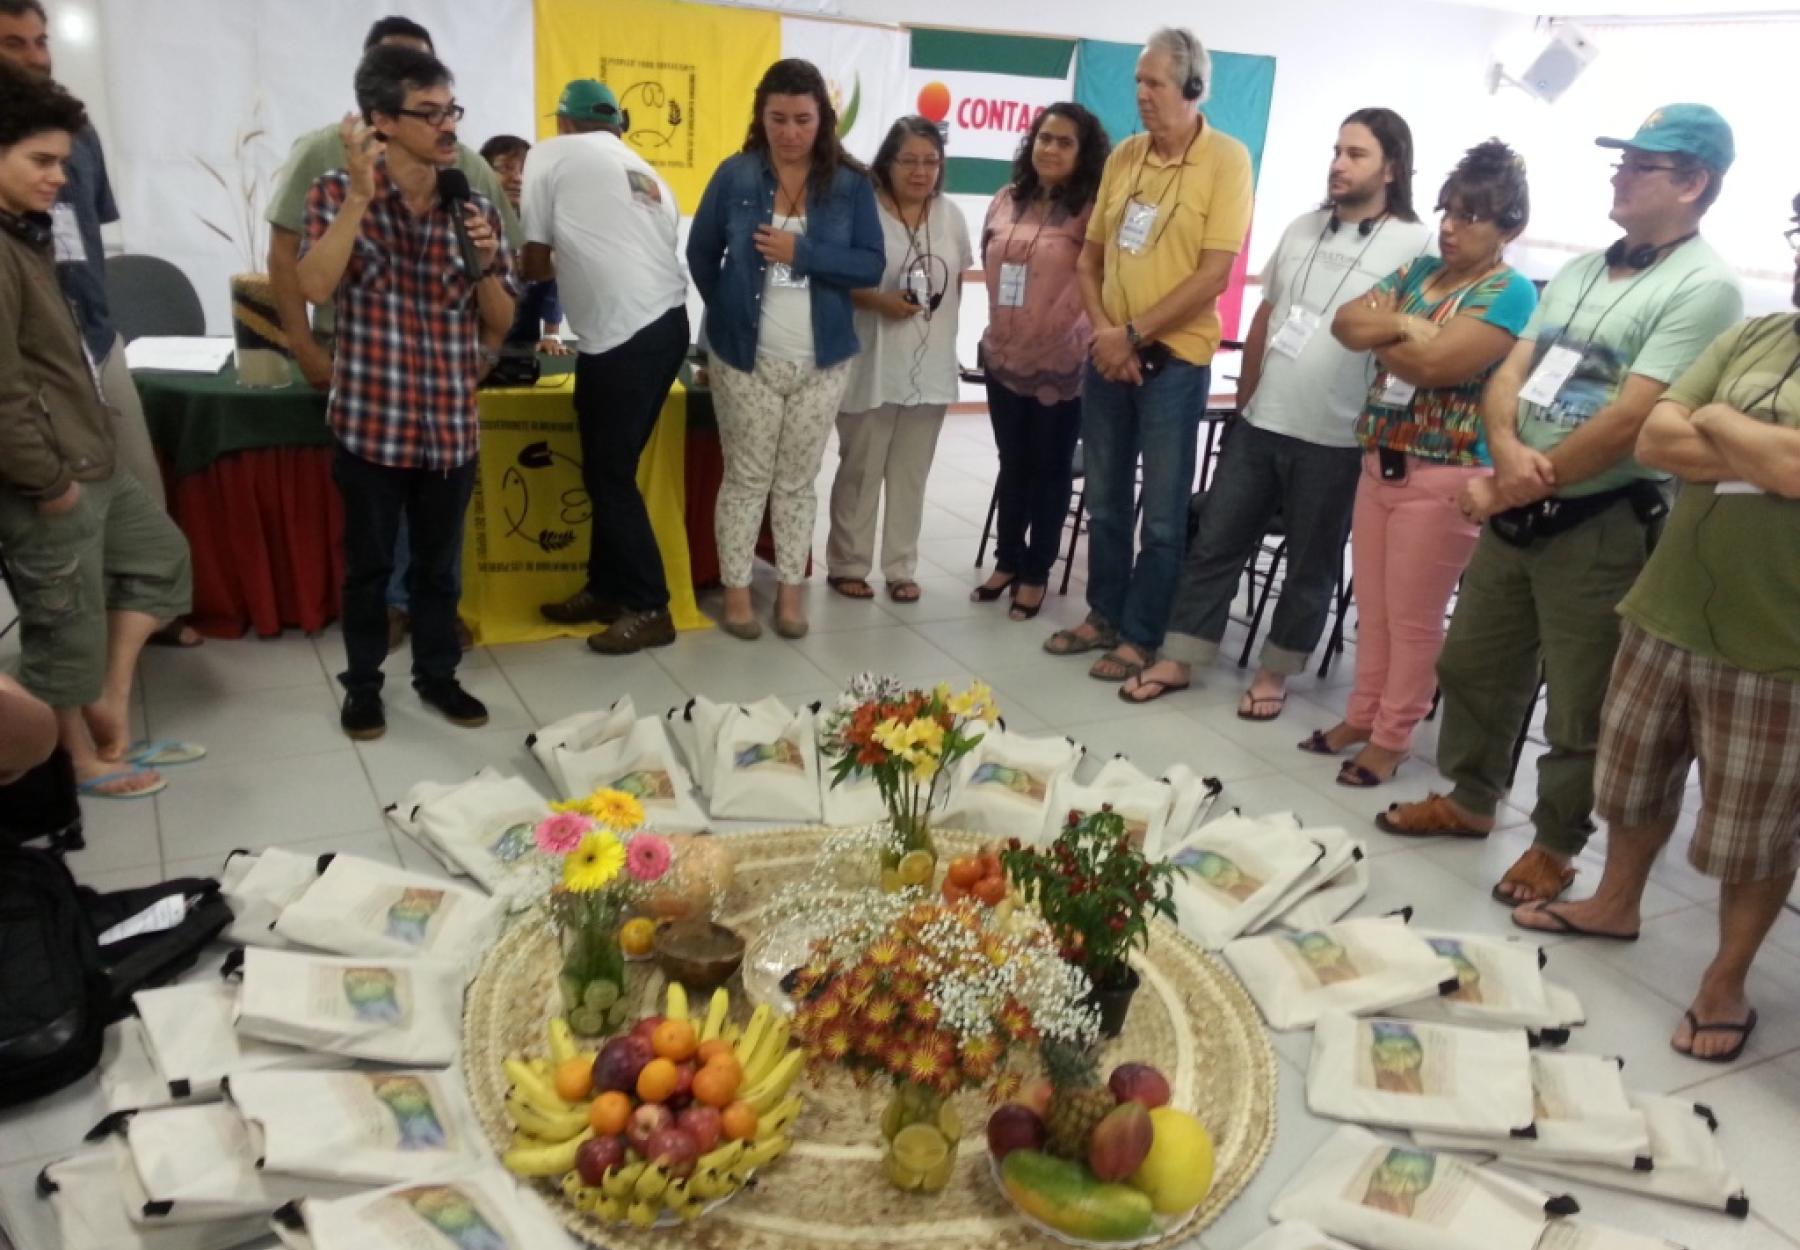 General Assembly Meeting of the International Planning Committee for Food Sovereignty in Brazil